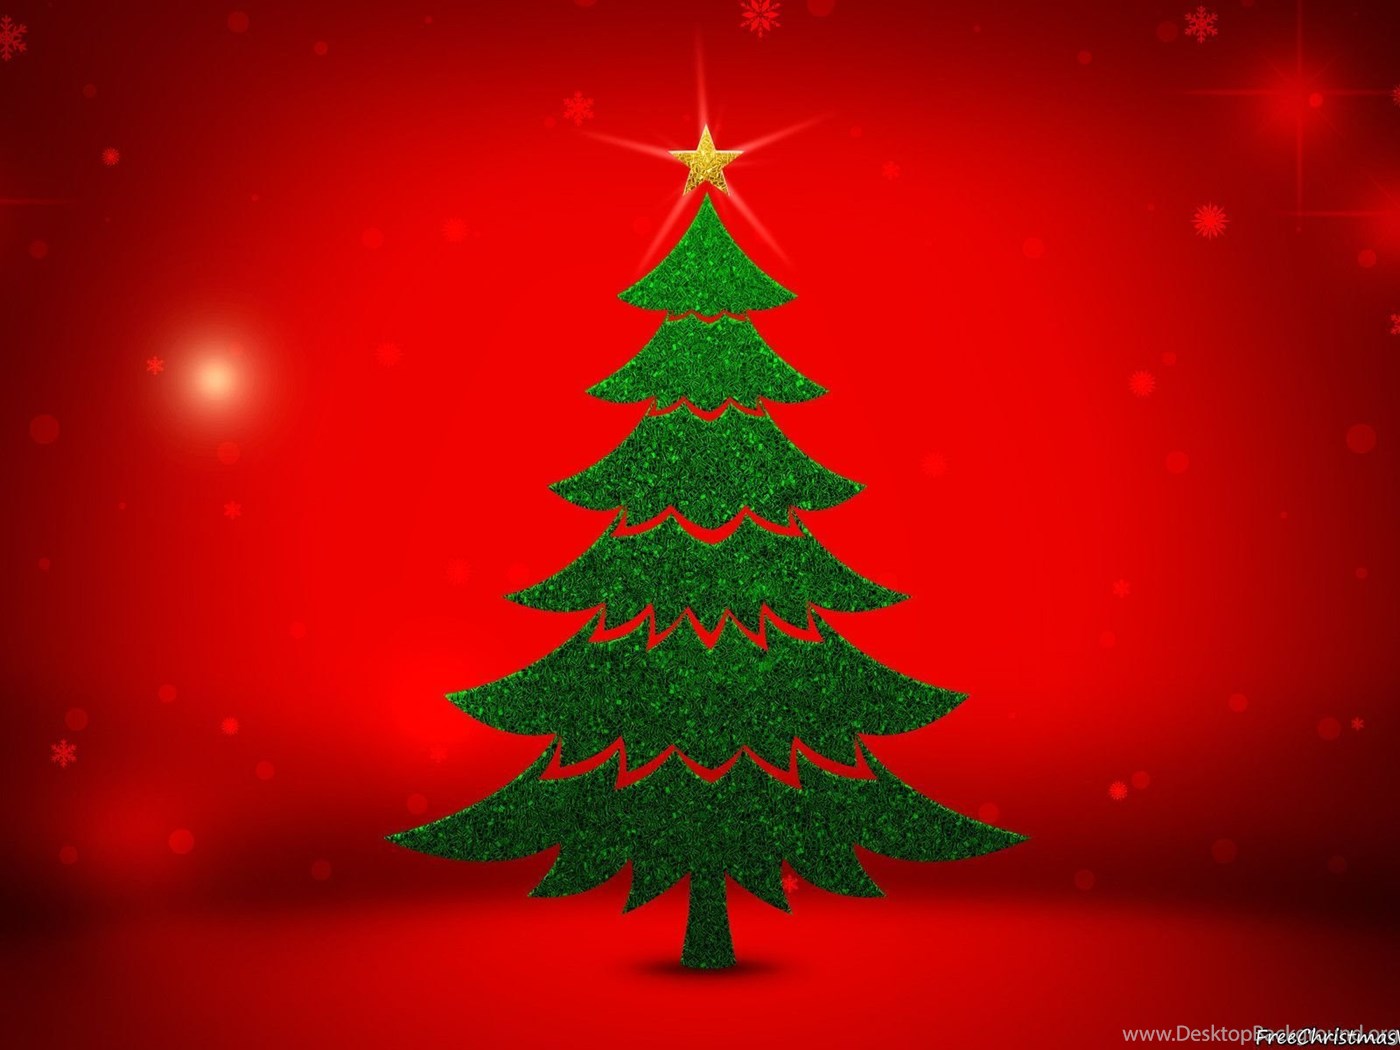 Christmas Tree Backgrounds Wallpapers Cave Desktop Background